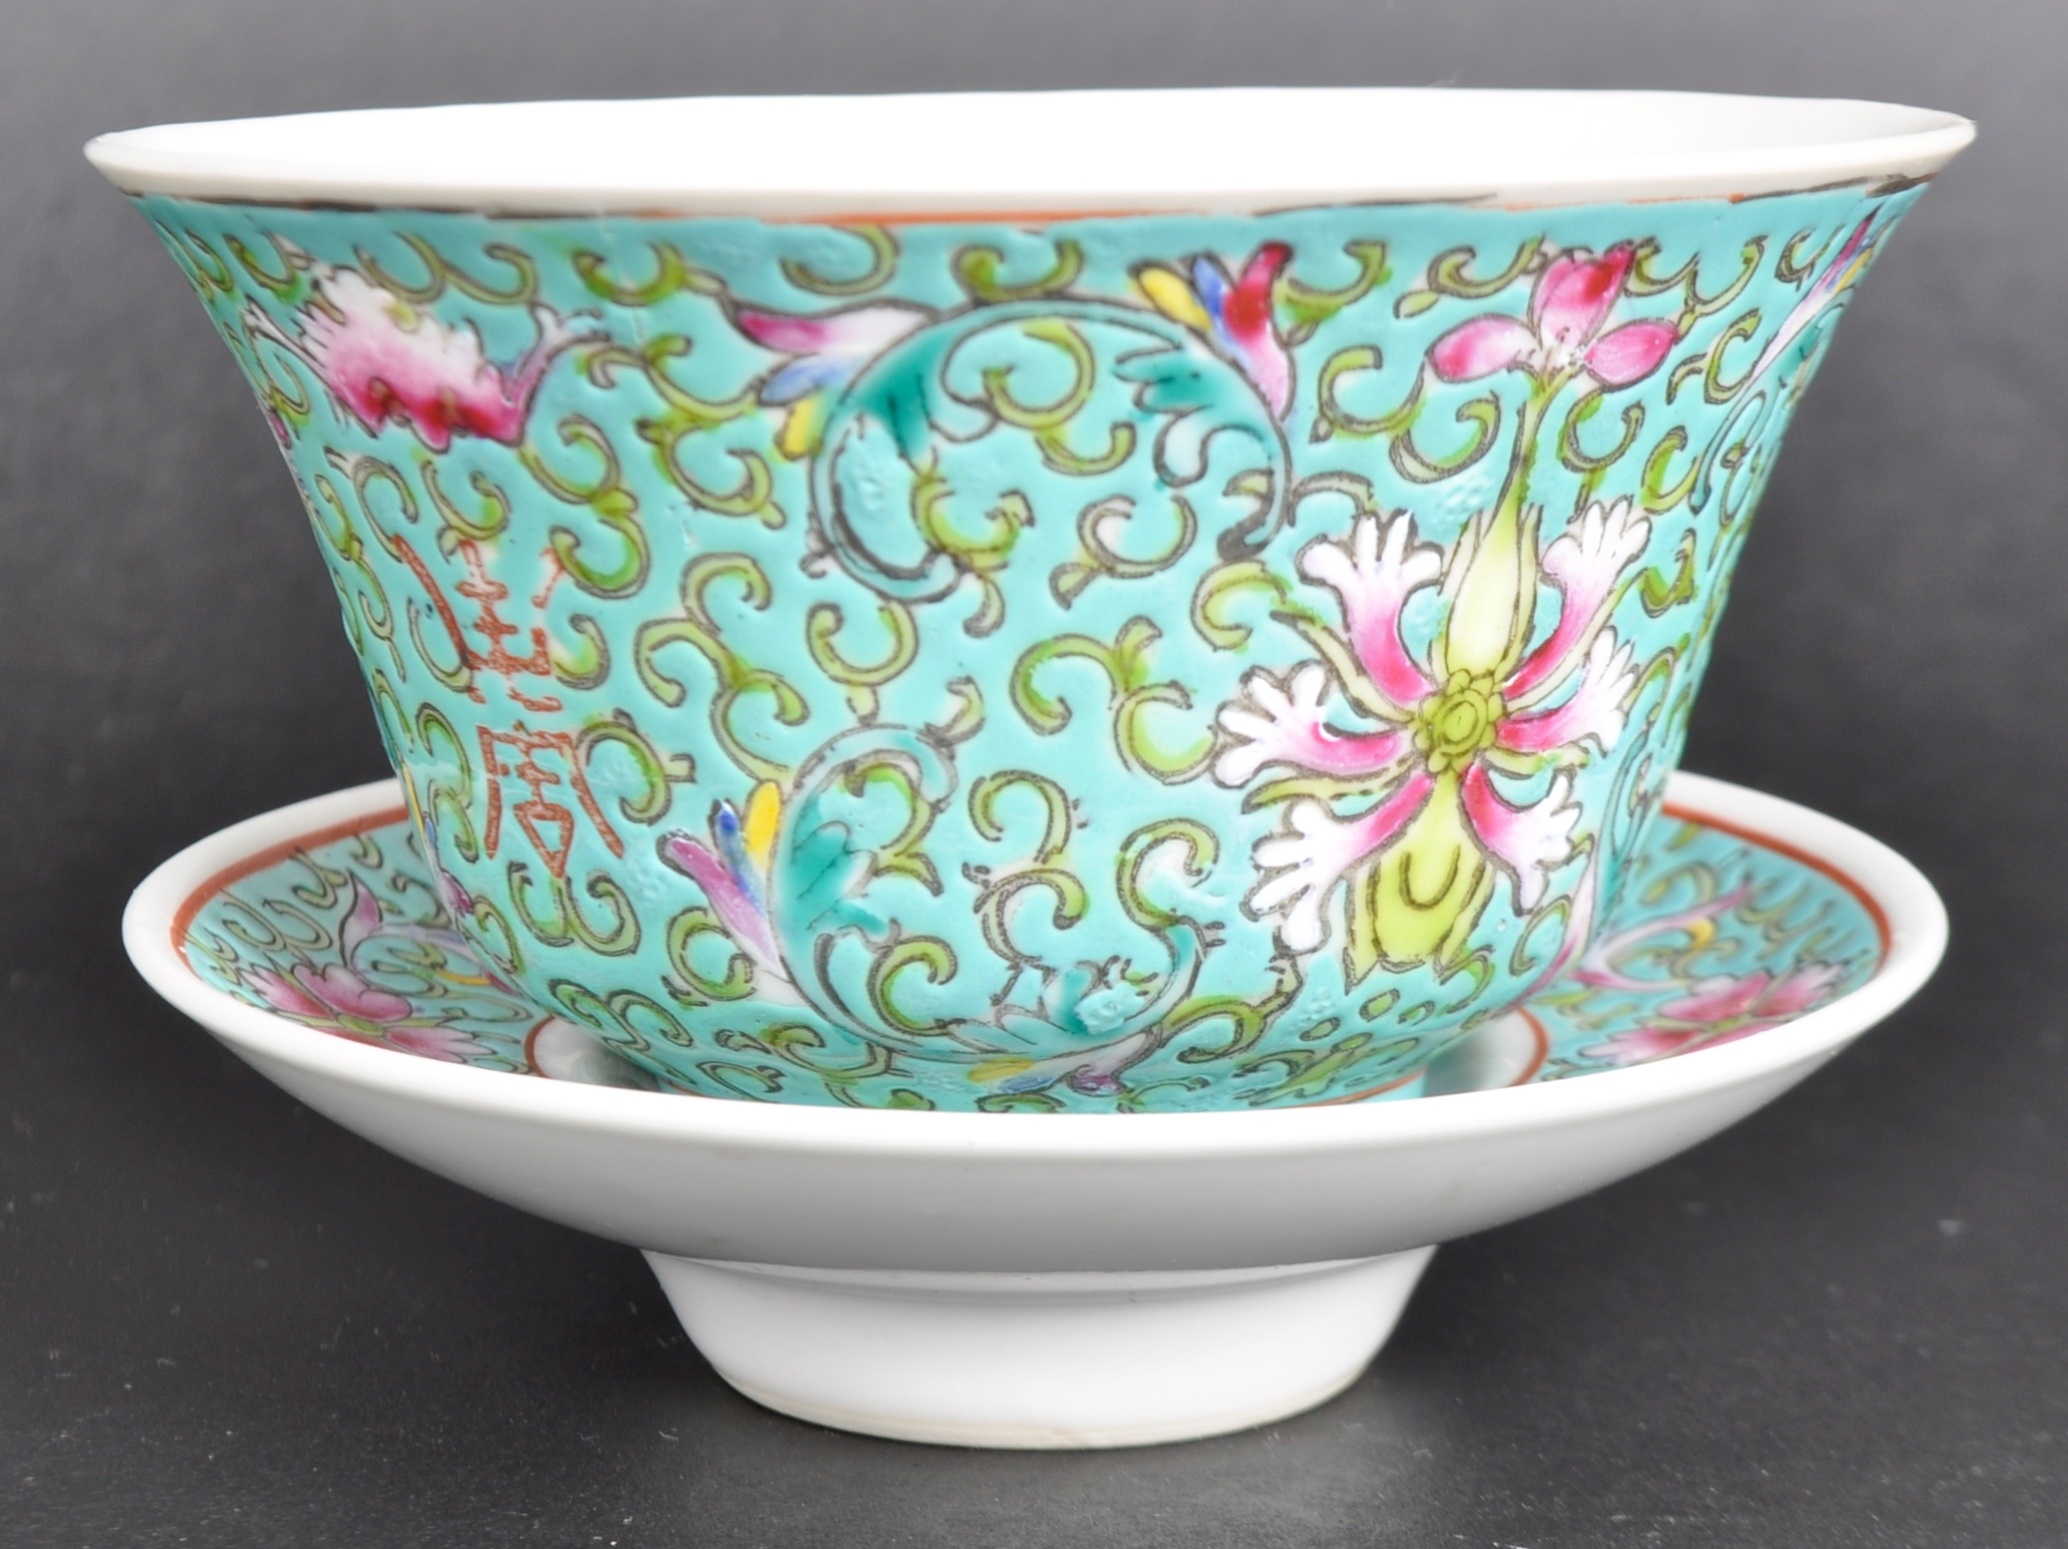 EARLY 20TH CENTURY CHINESE PORCELAIN CUP & SAUCER